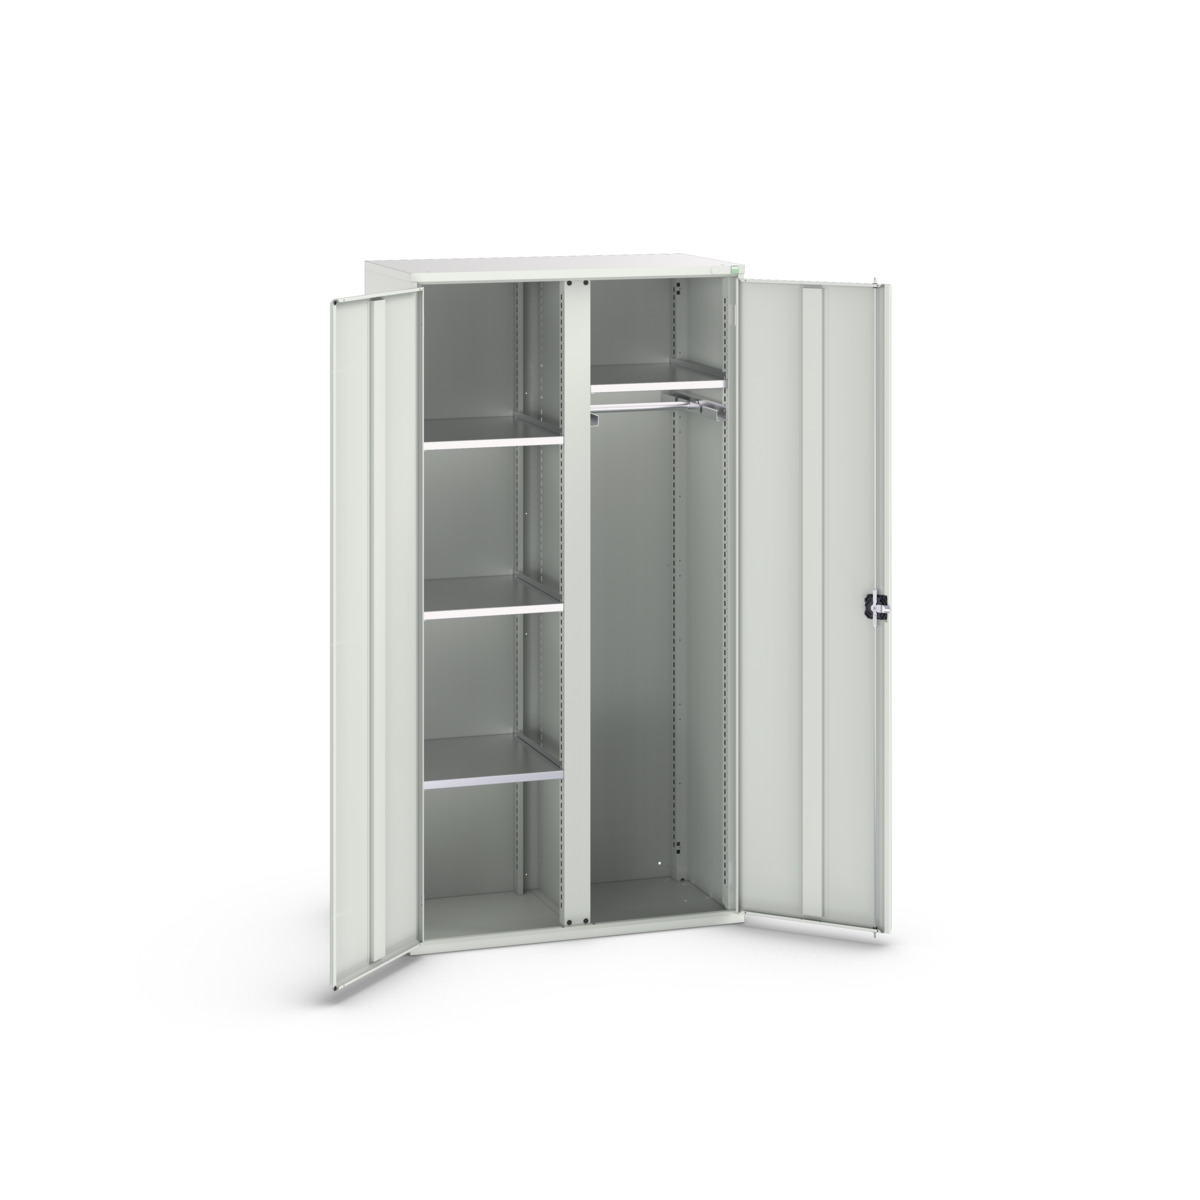 16926579.16 - verso kitted cupboard